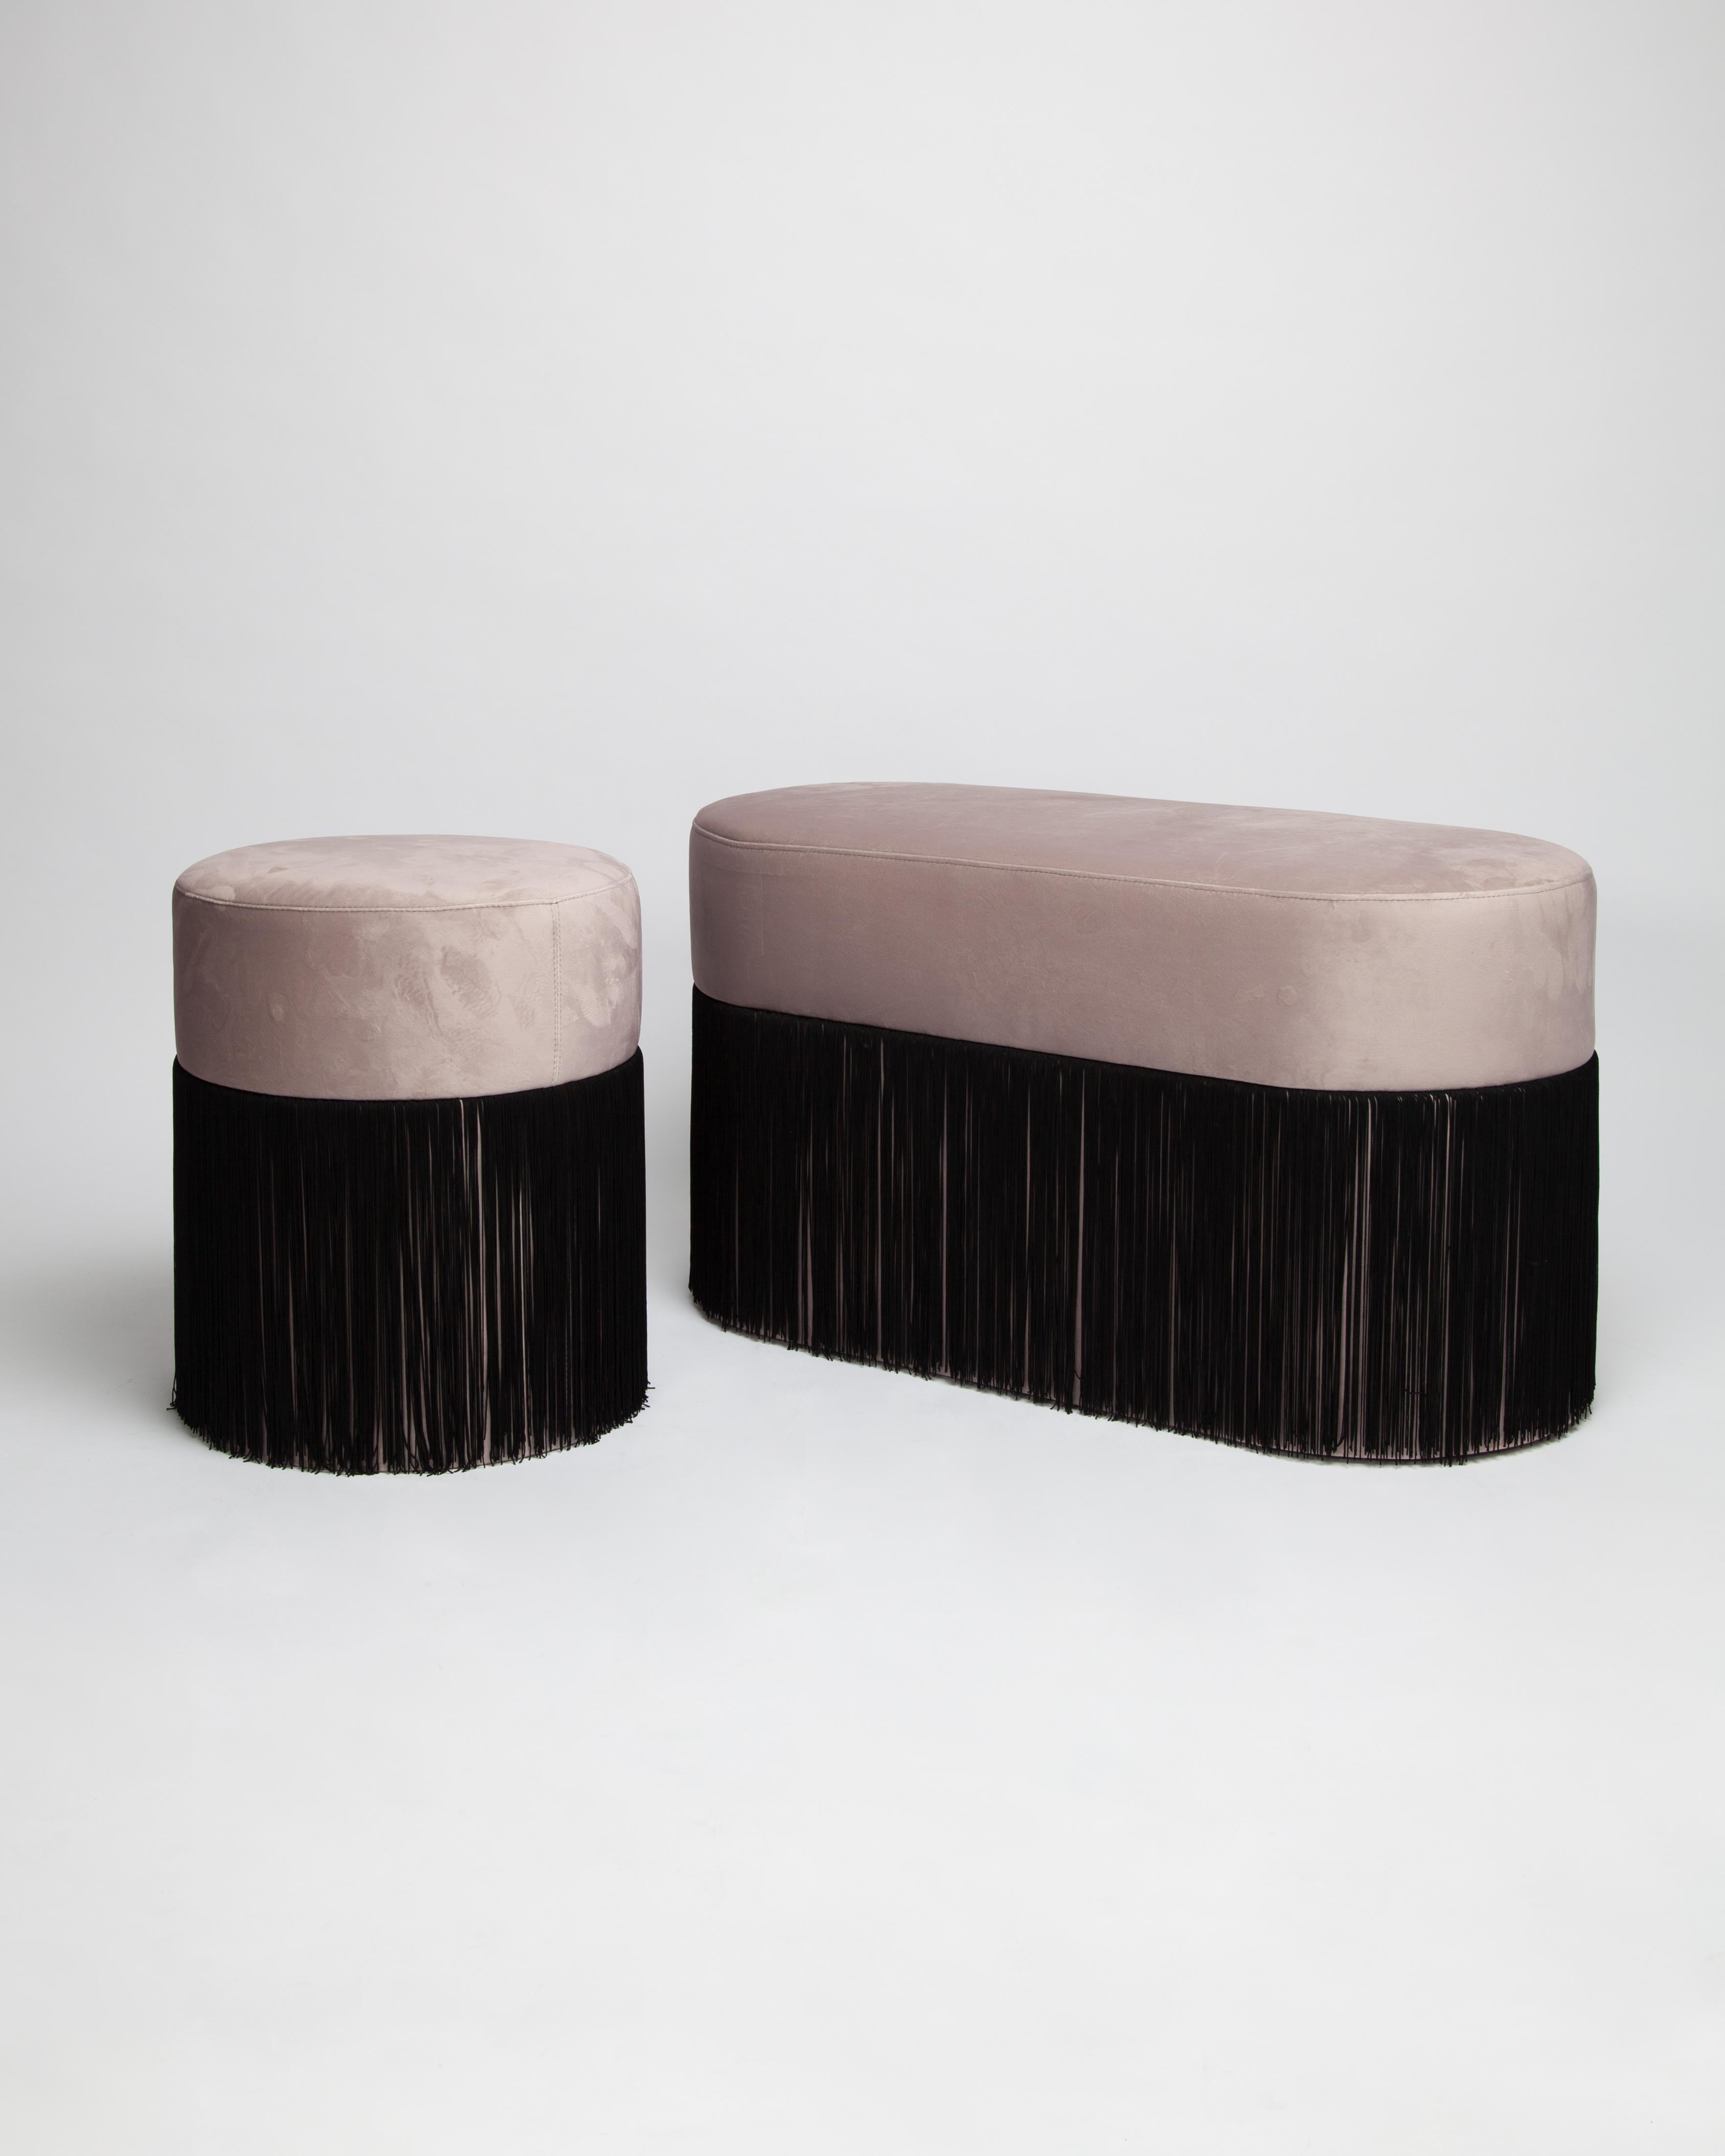 Pouf Pill S by Houtique 8